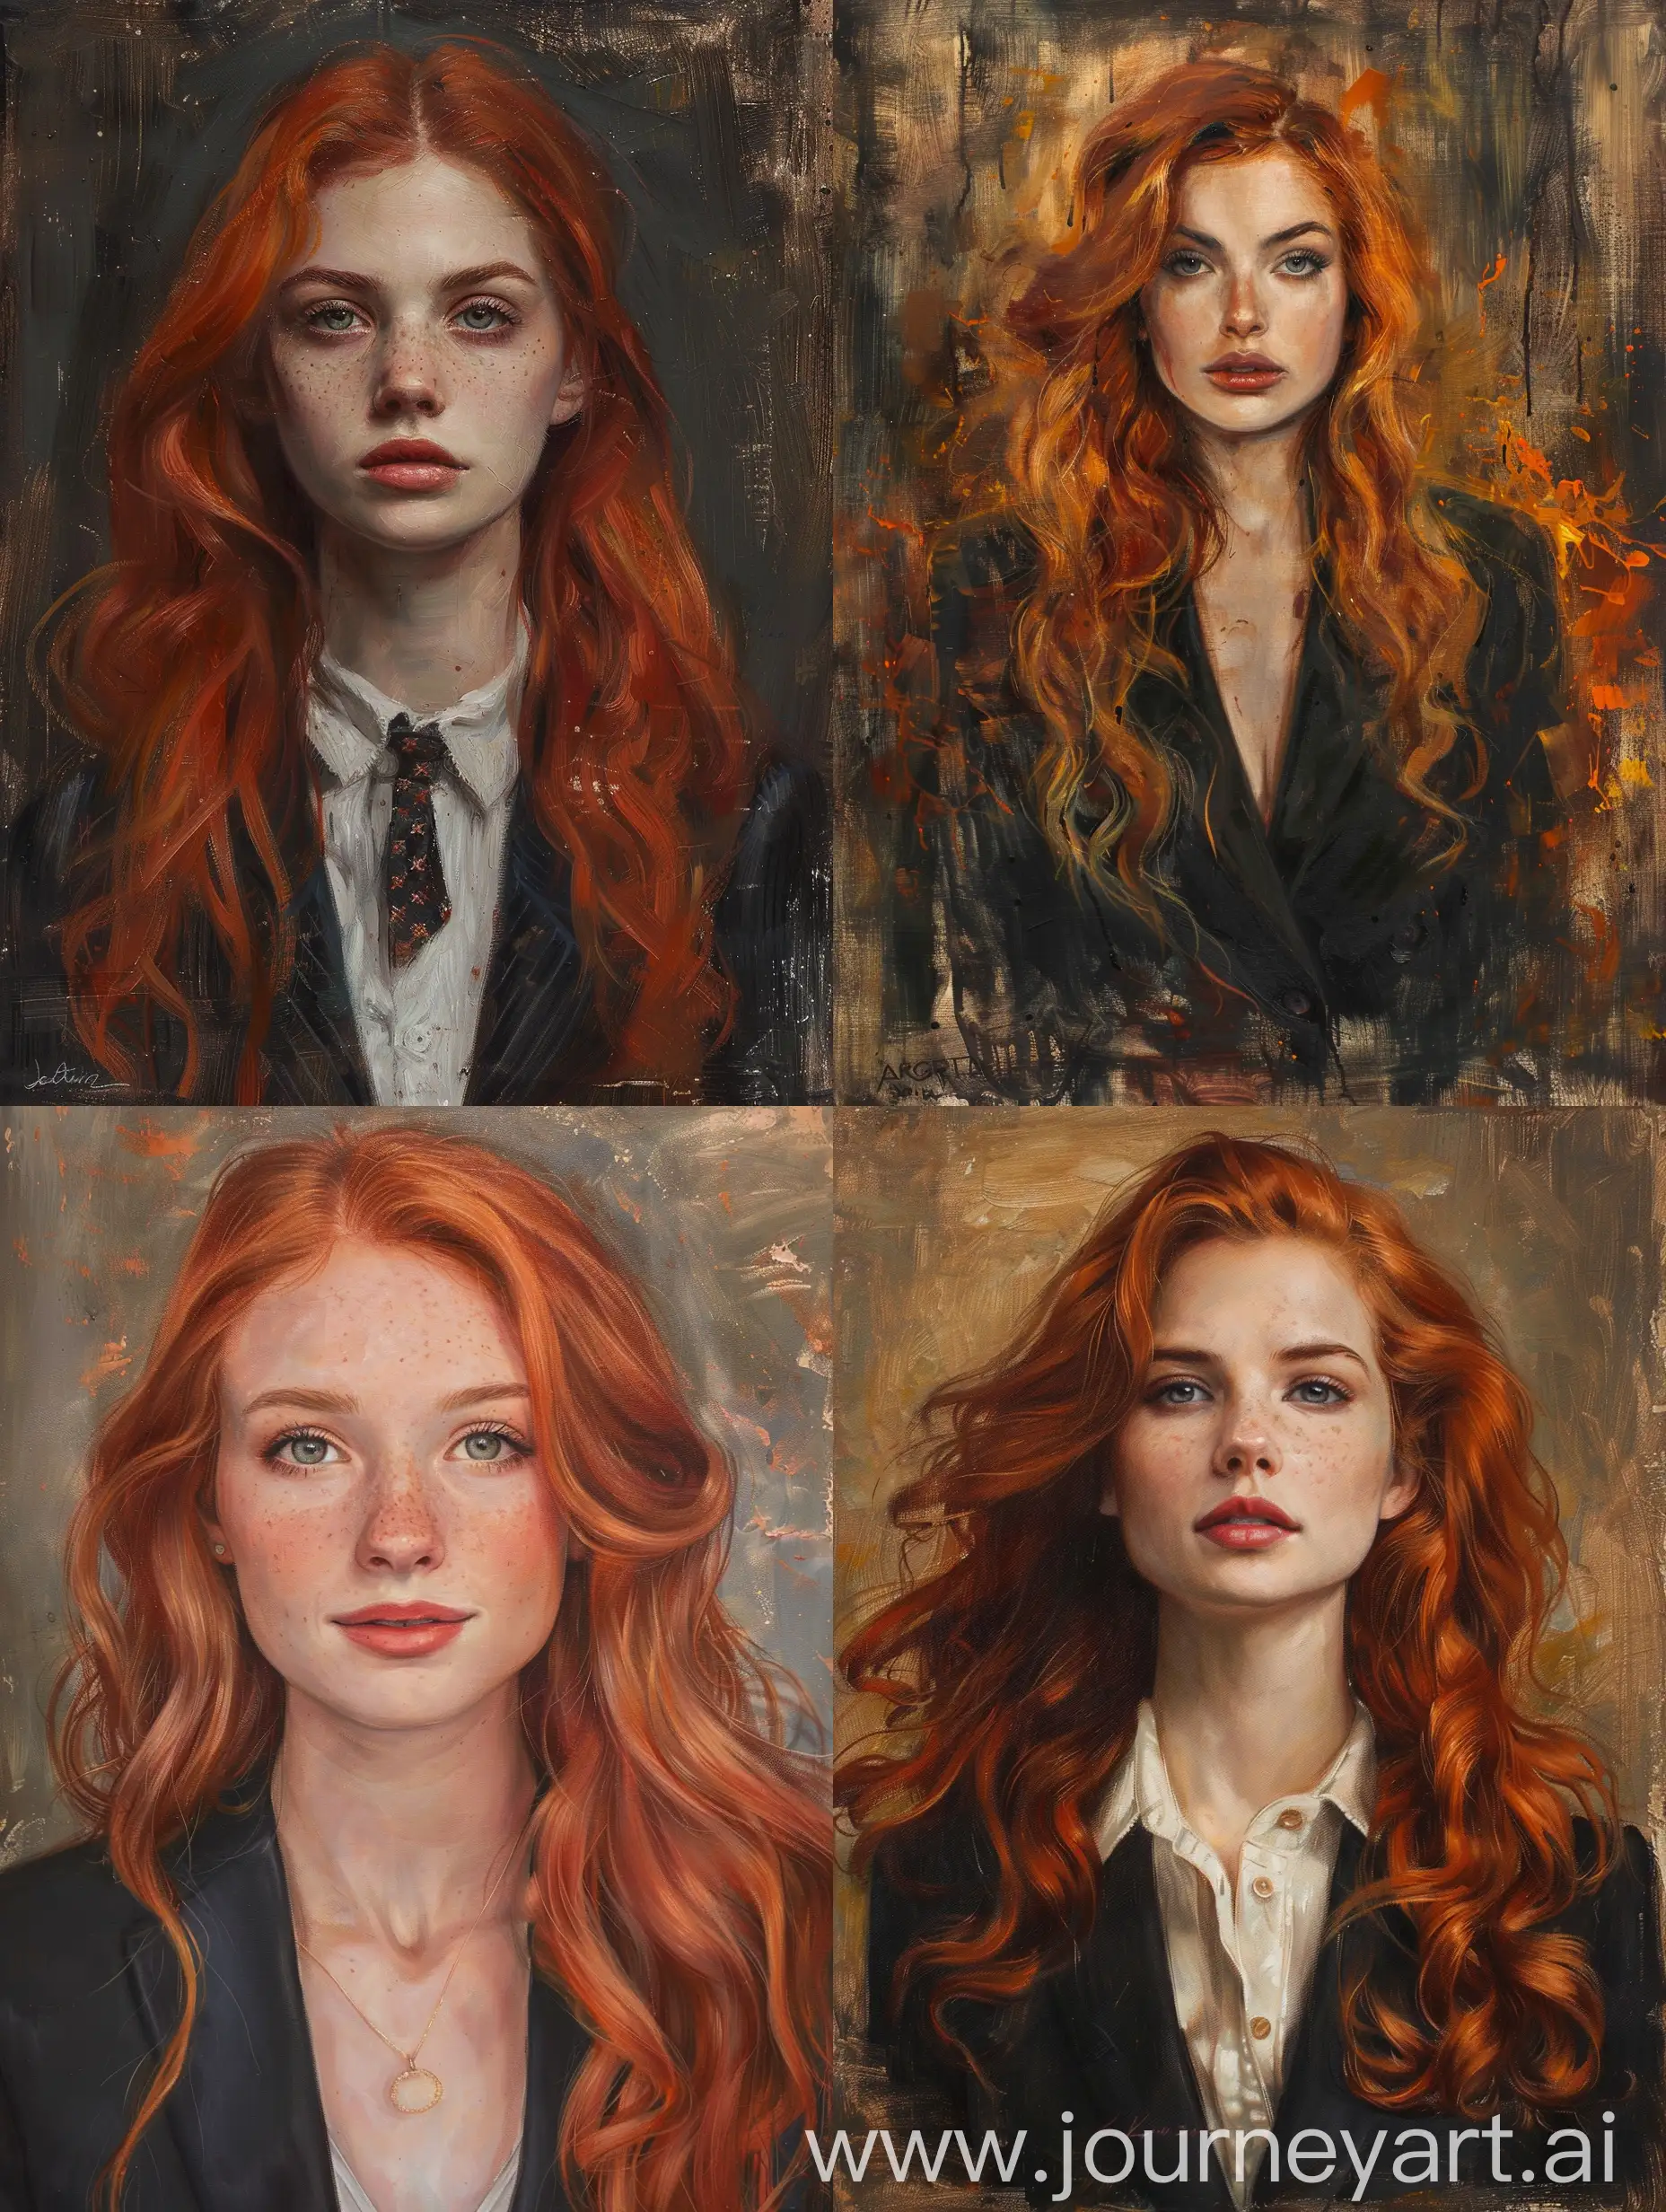 Portrait-of-a-Young-Woman-with-Fiery-Red-Hair-in-Elegant-Suit